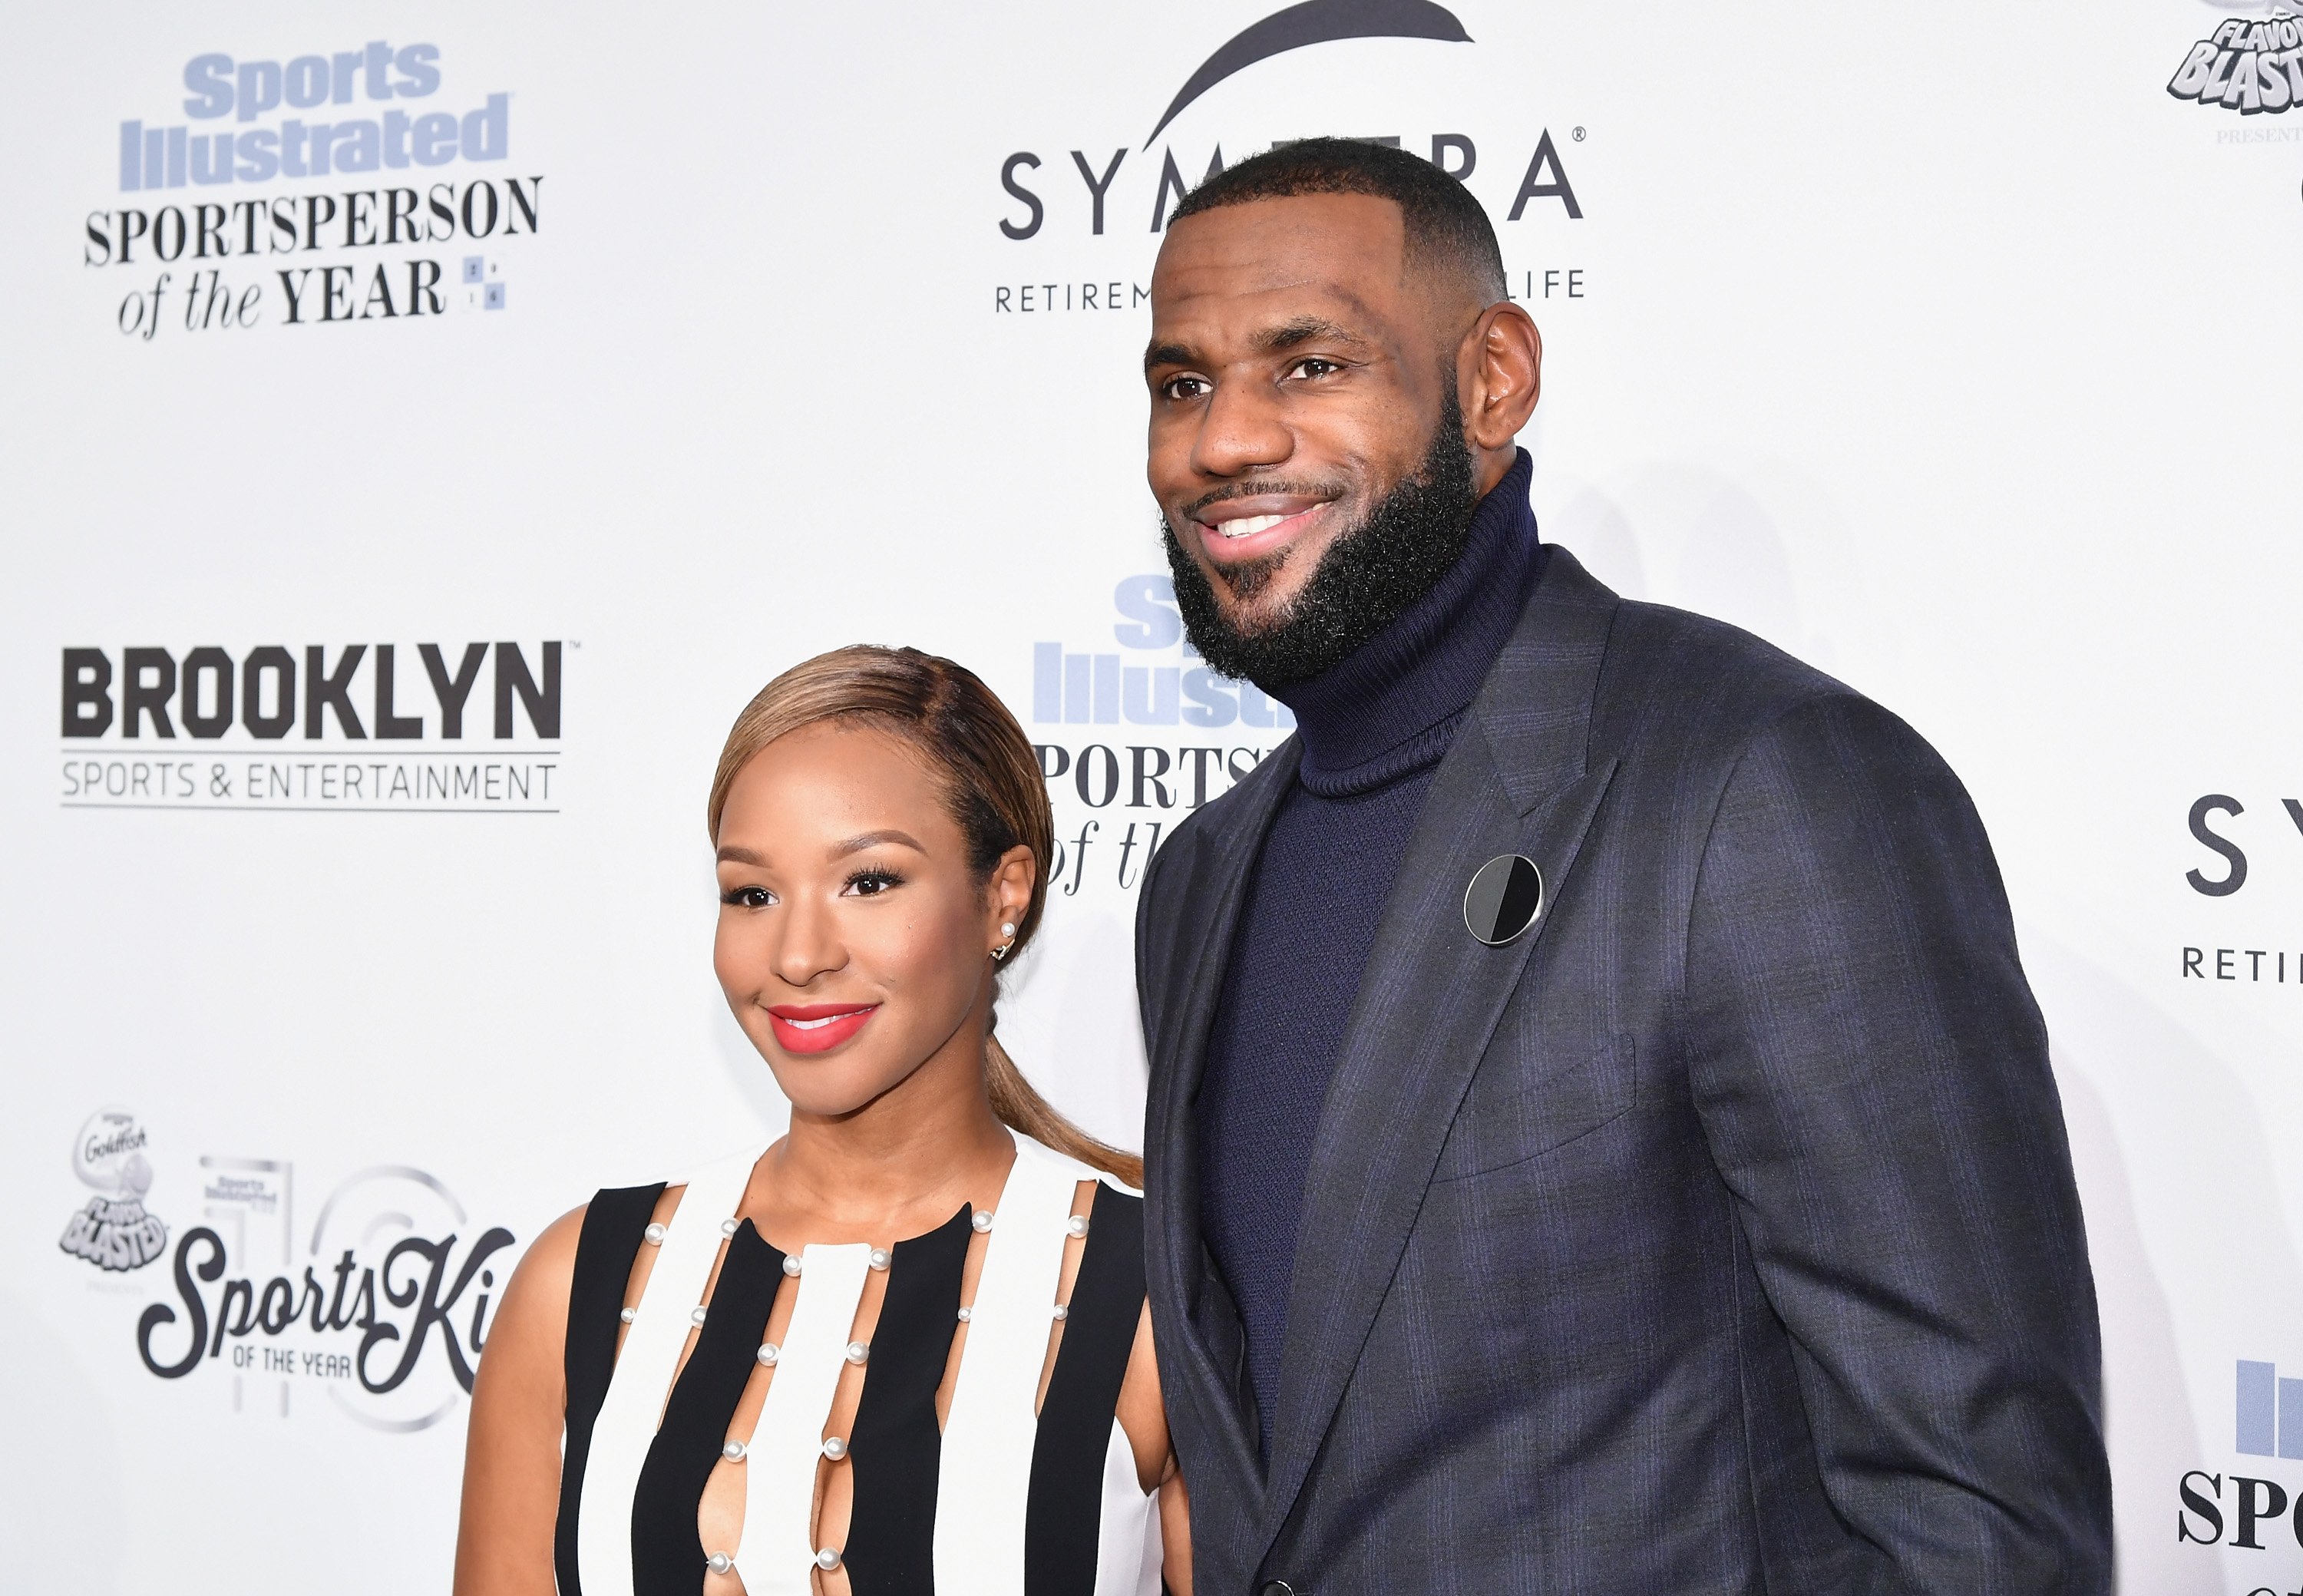 LeBron & Savannah James at the Sports Illustrated Sportsperson of the Year Ceremony on Dec. 12, 2016 in New York City | Photo: Getty Images